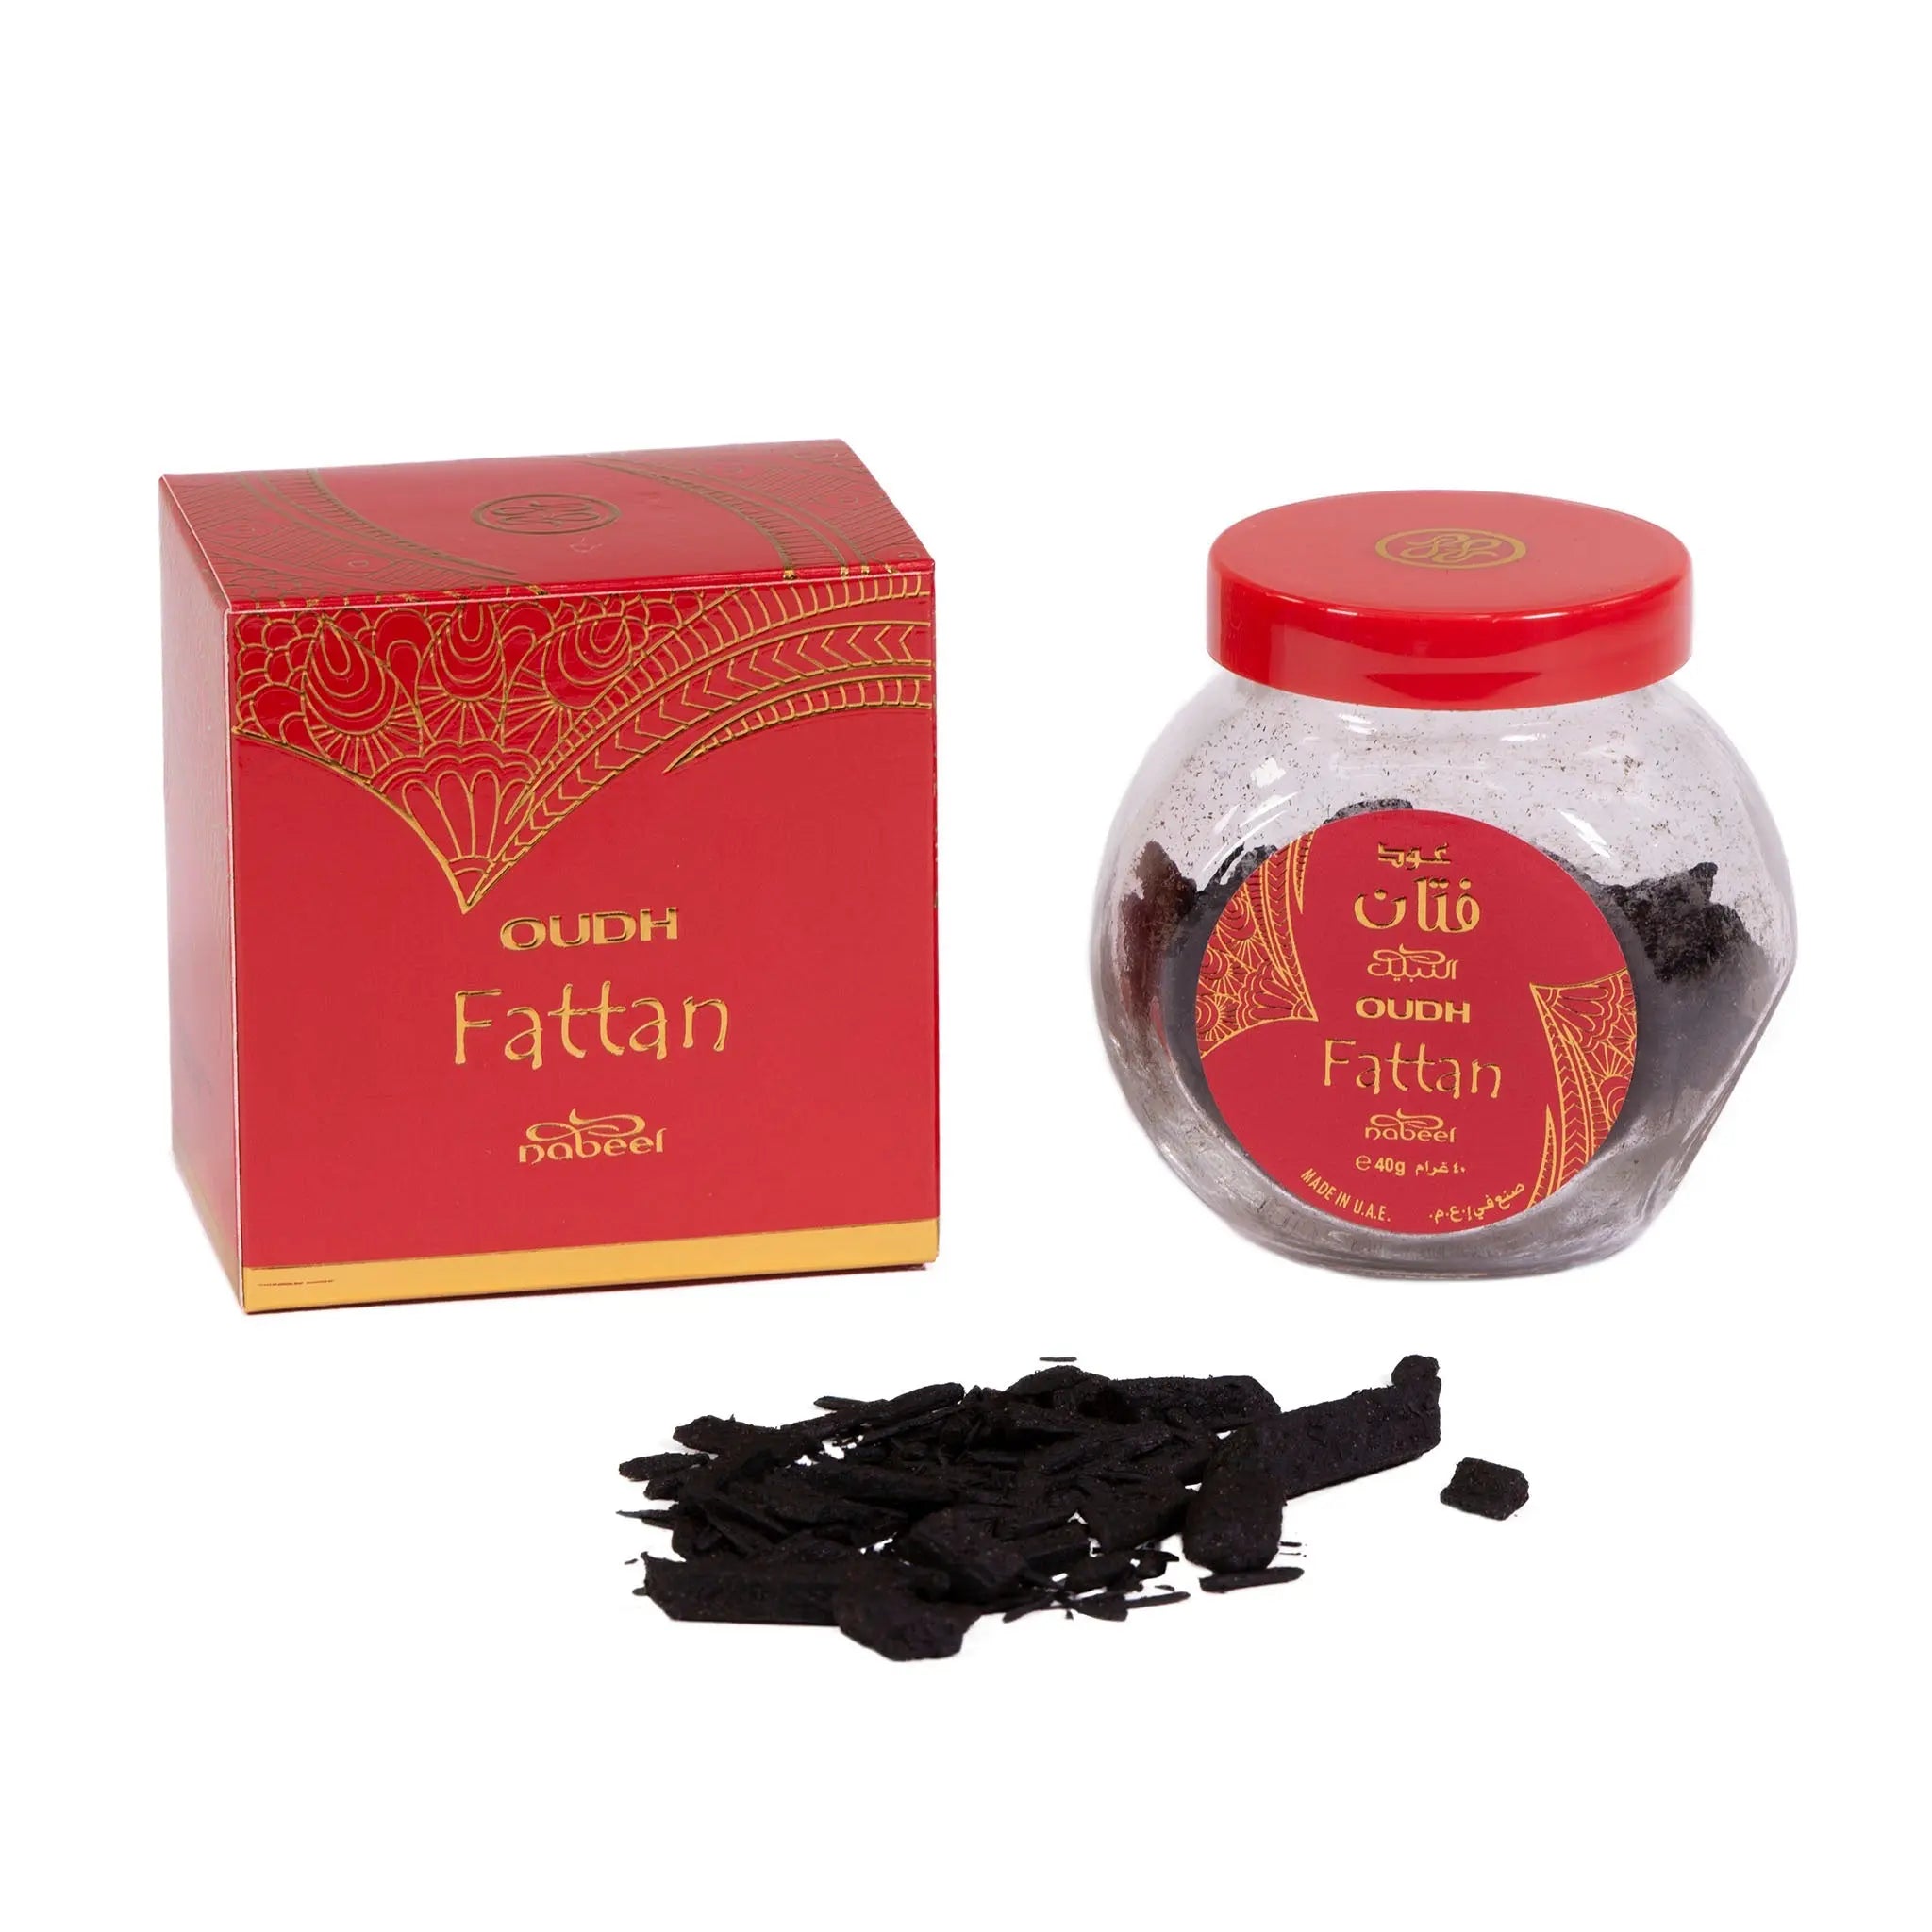 The image shows a product called "OUDH Fattan" by Nabeel, presented with a red and gold box and a clear glass jar with a red lid. Both the box and jar feature an intricate, traditional Arabic-style golden pattern. Arabic and English text on the label identify the product. In front of the jar, there are several pieces of dark, resinous material, presumed to be oudh (agarwood), used for its aromatic properties.